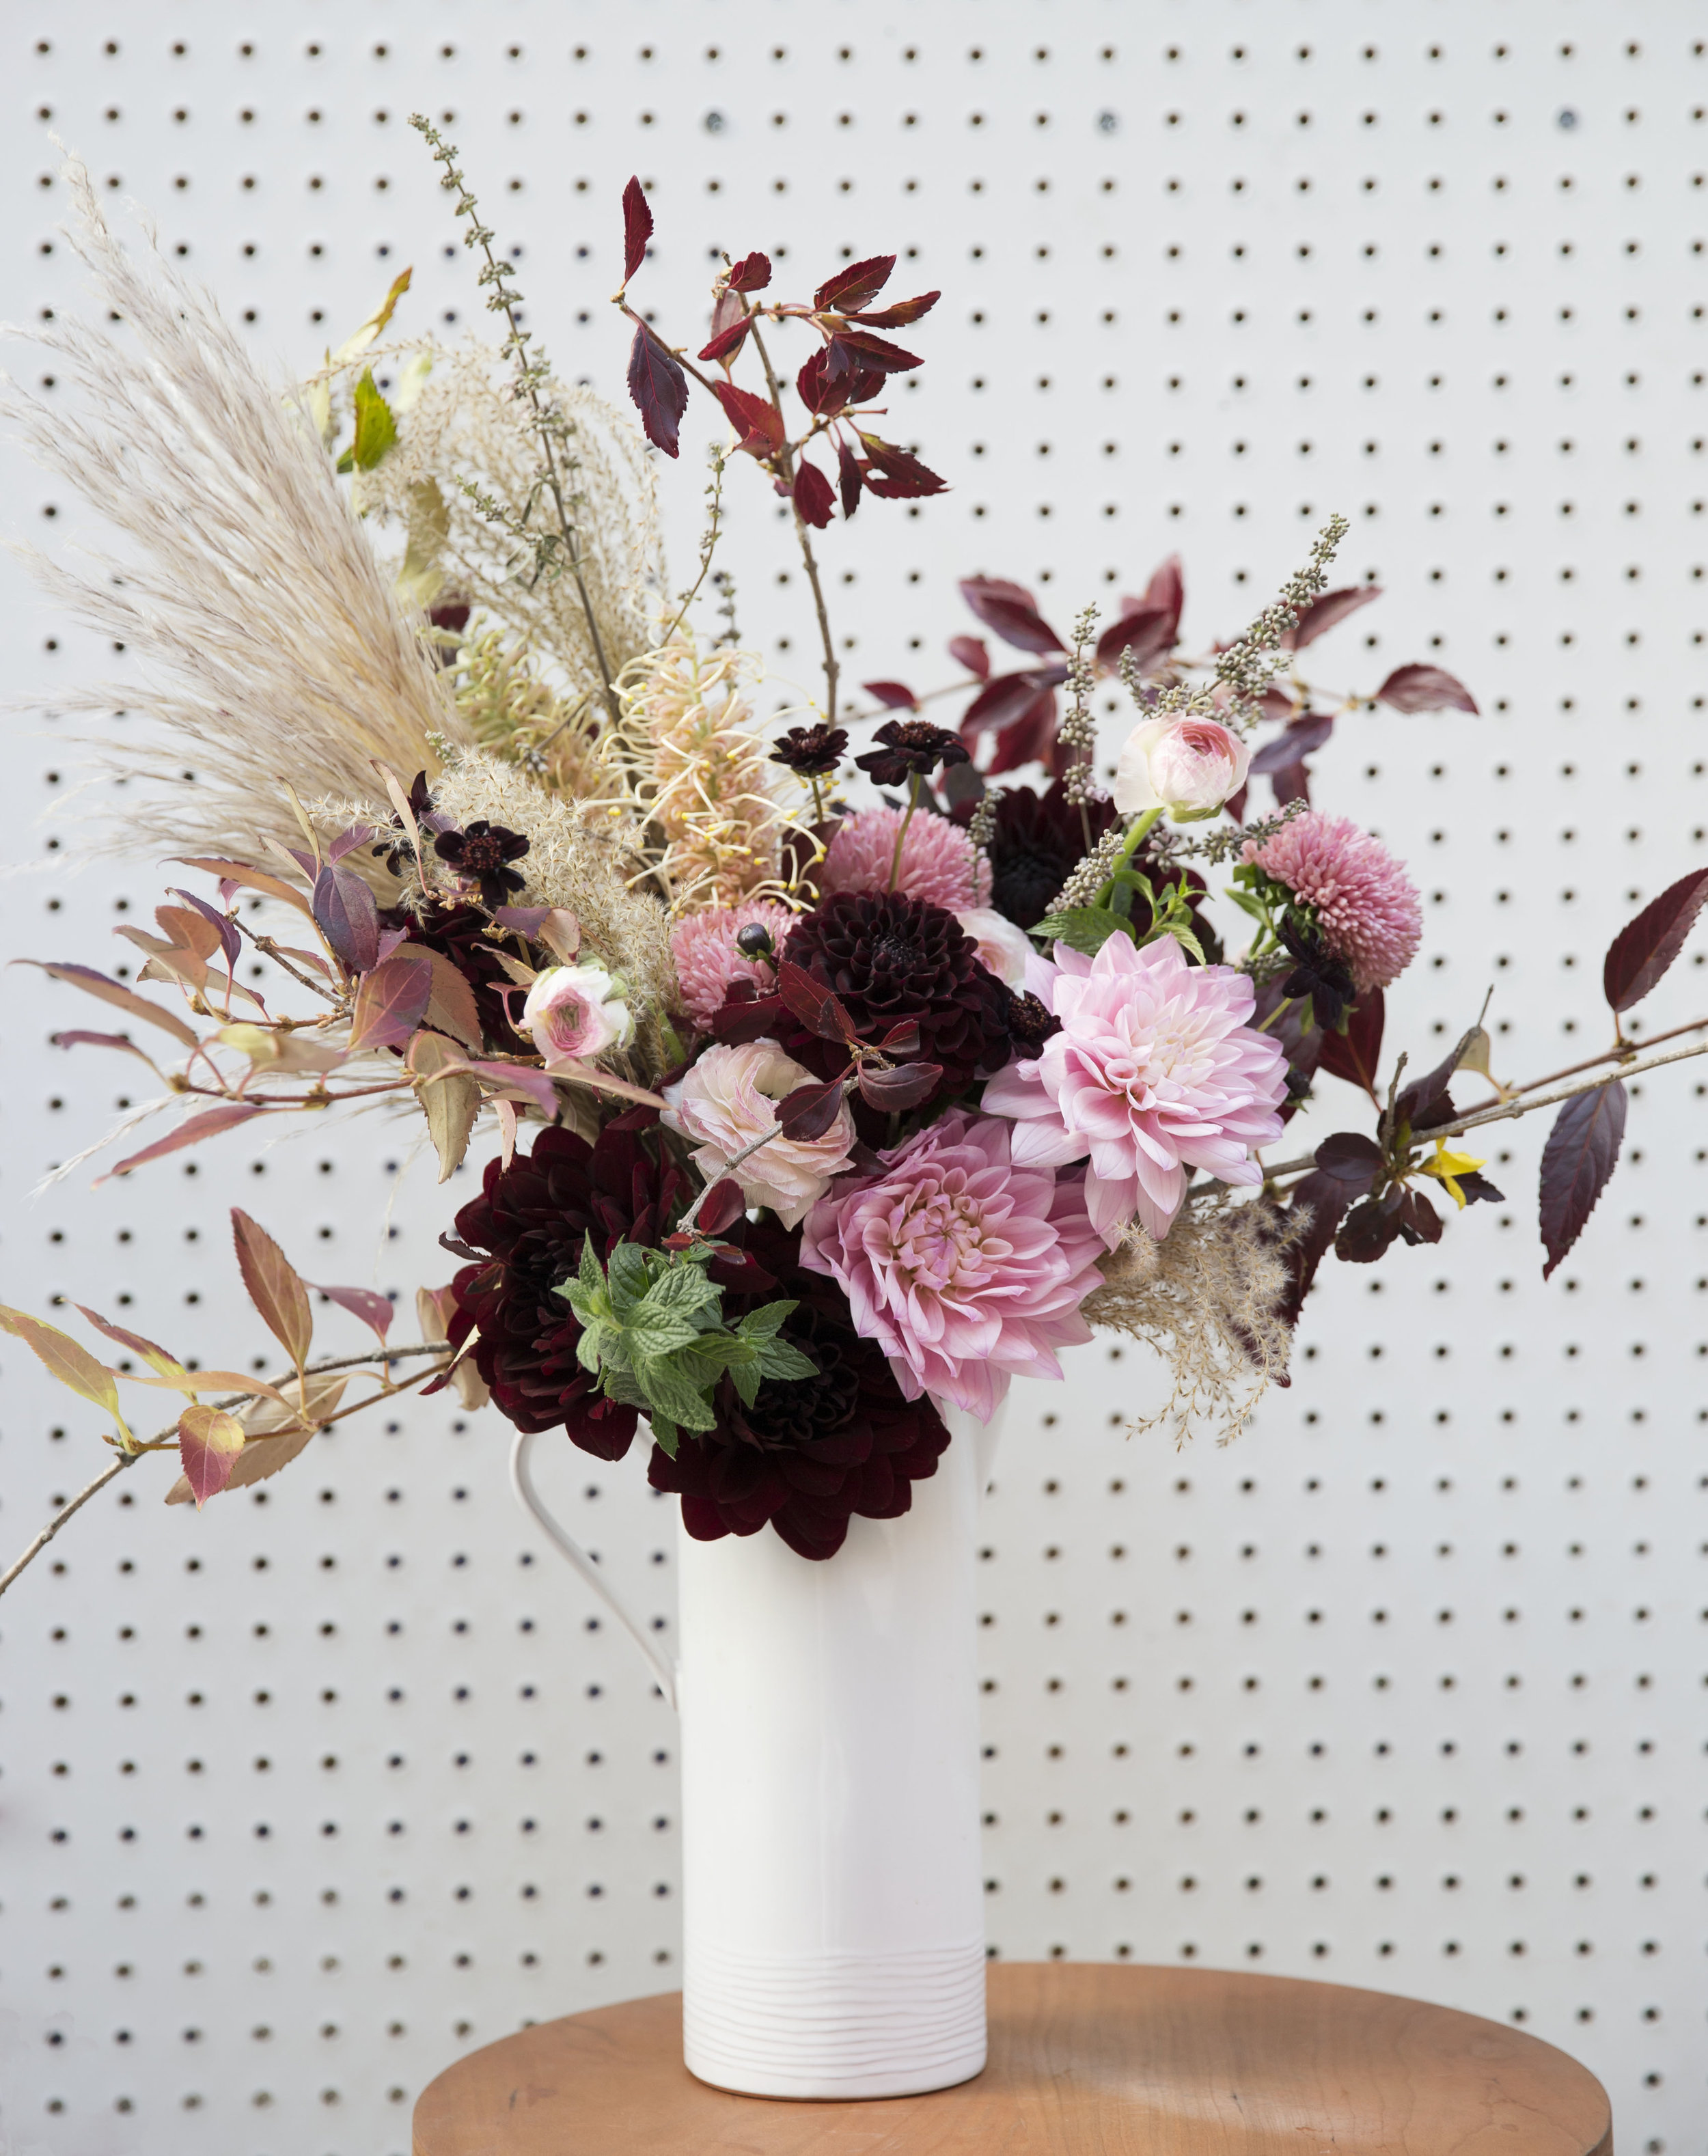 It’s Blooming: Floral Pop-Up & Workshop w/ The Wild Bunch